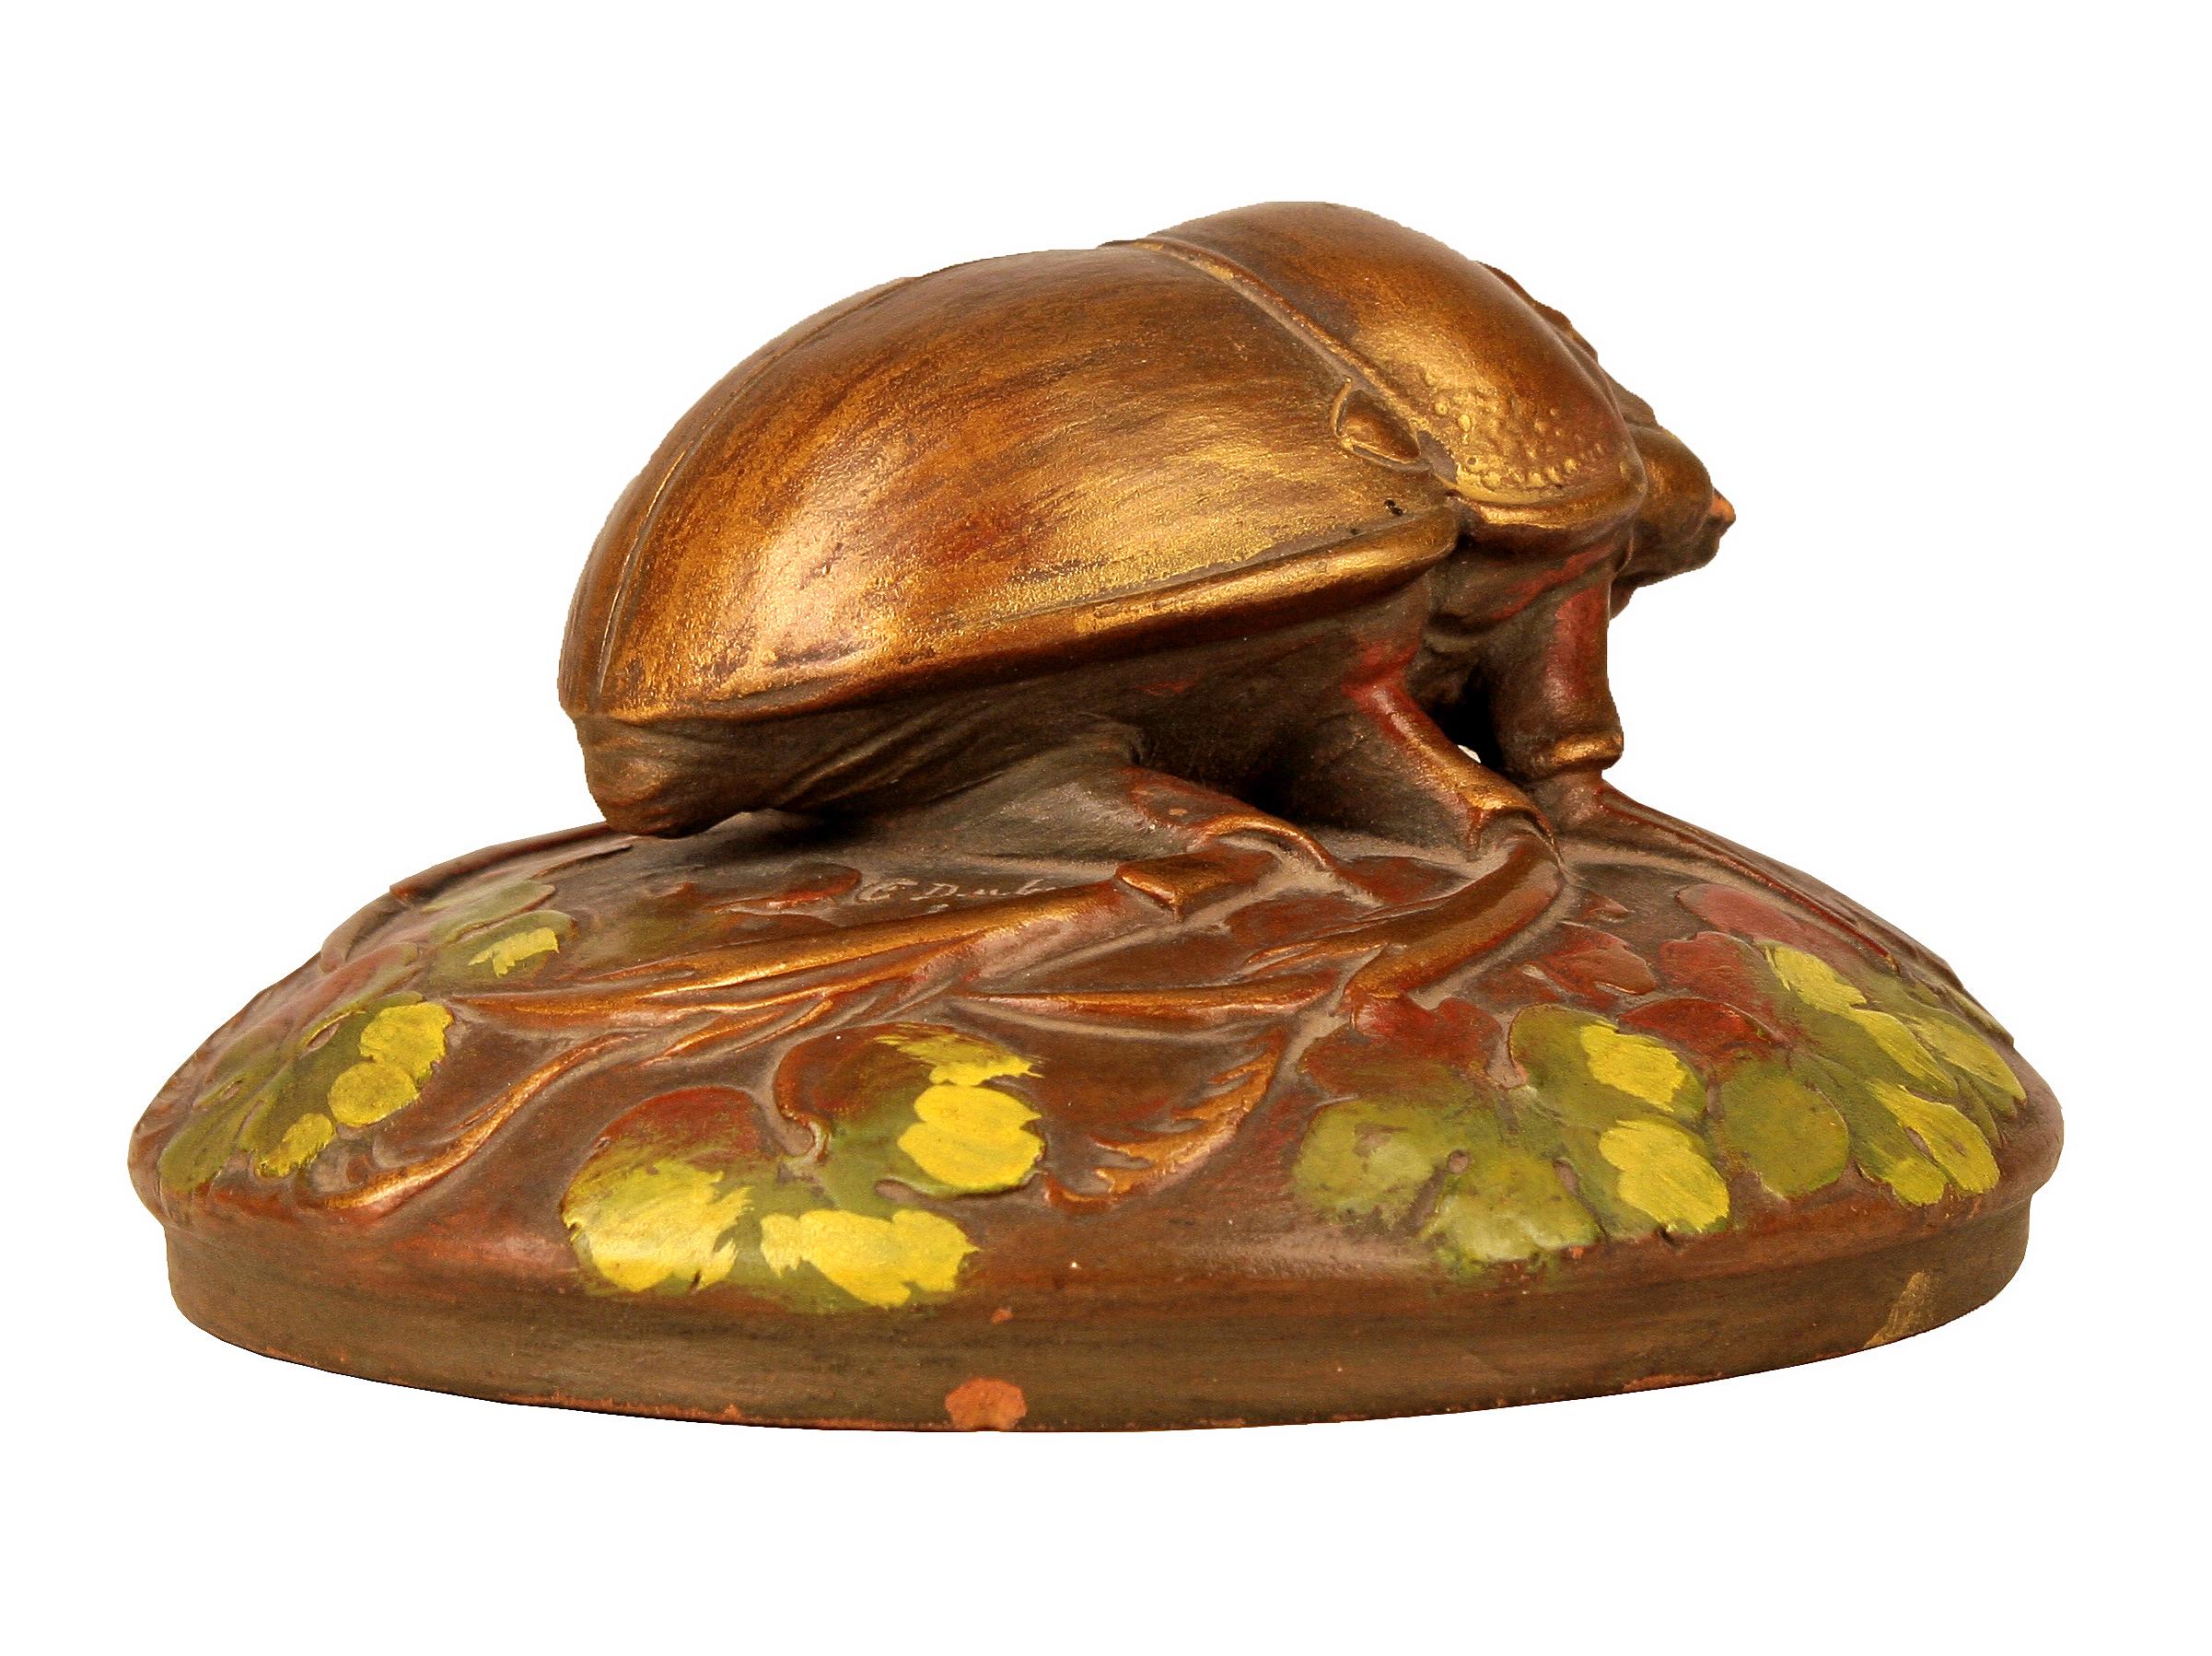 Belle Époque Early 20th Century French Cold-Painted Ceramic Beetle Sculpture by Ernest Dubois For Sale